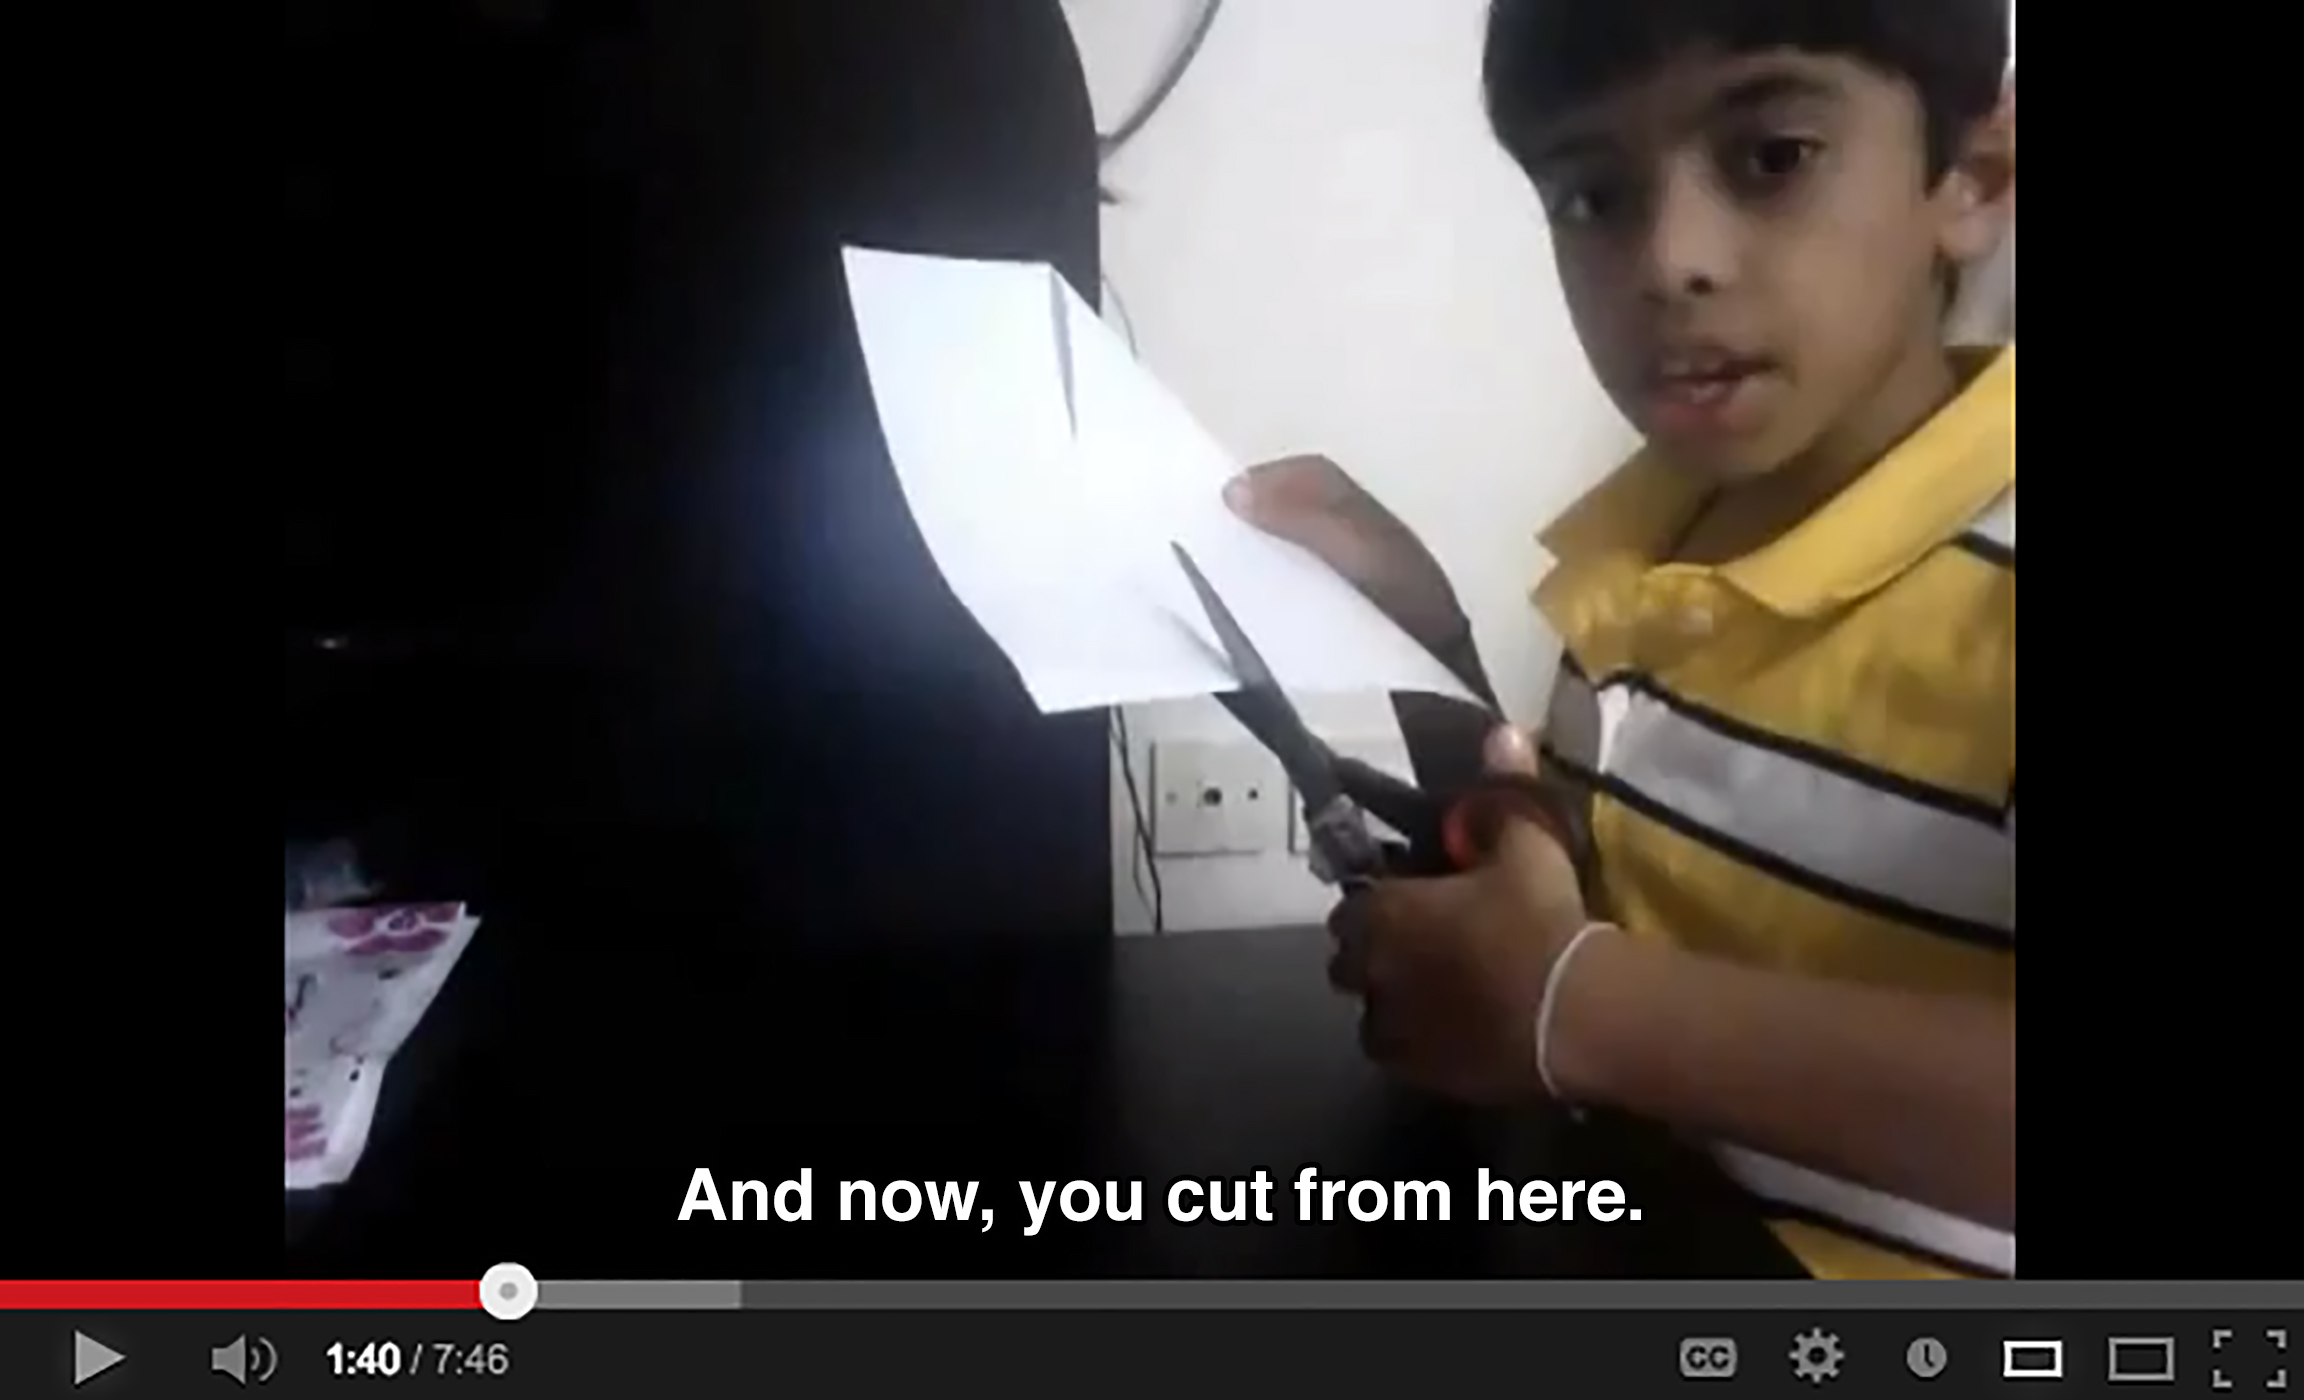 A young boy sits at a desk and cuts paper with scissors while looking at the camera, saying: And now, you cut from here.